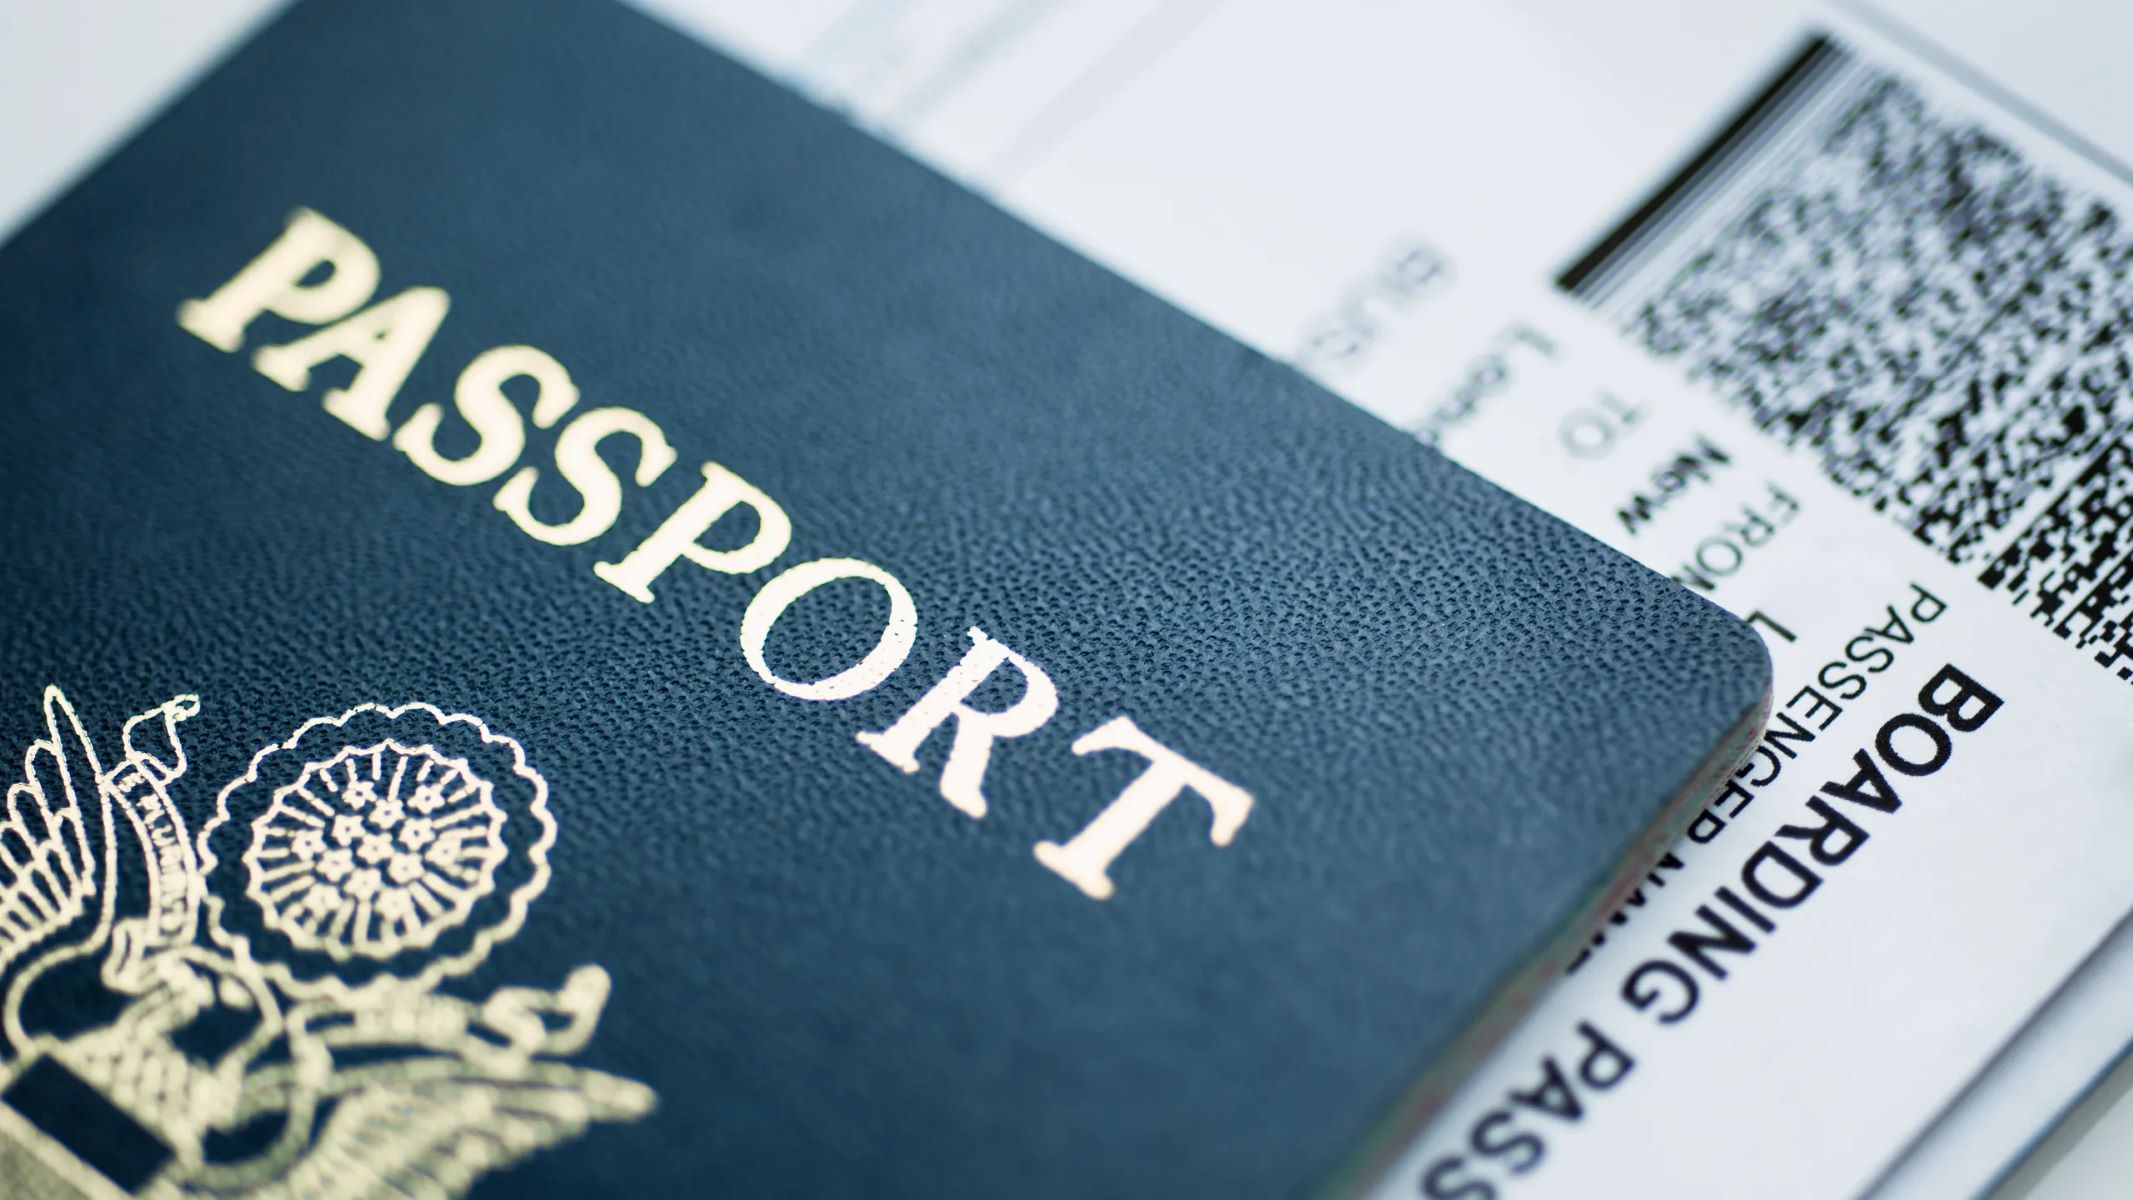 You Won't Believe What Happens To Your Passport Book If You Lose Your Passport Card!